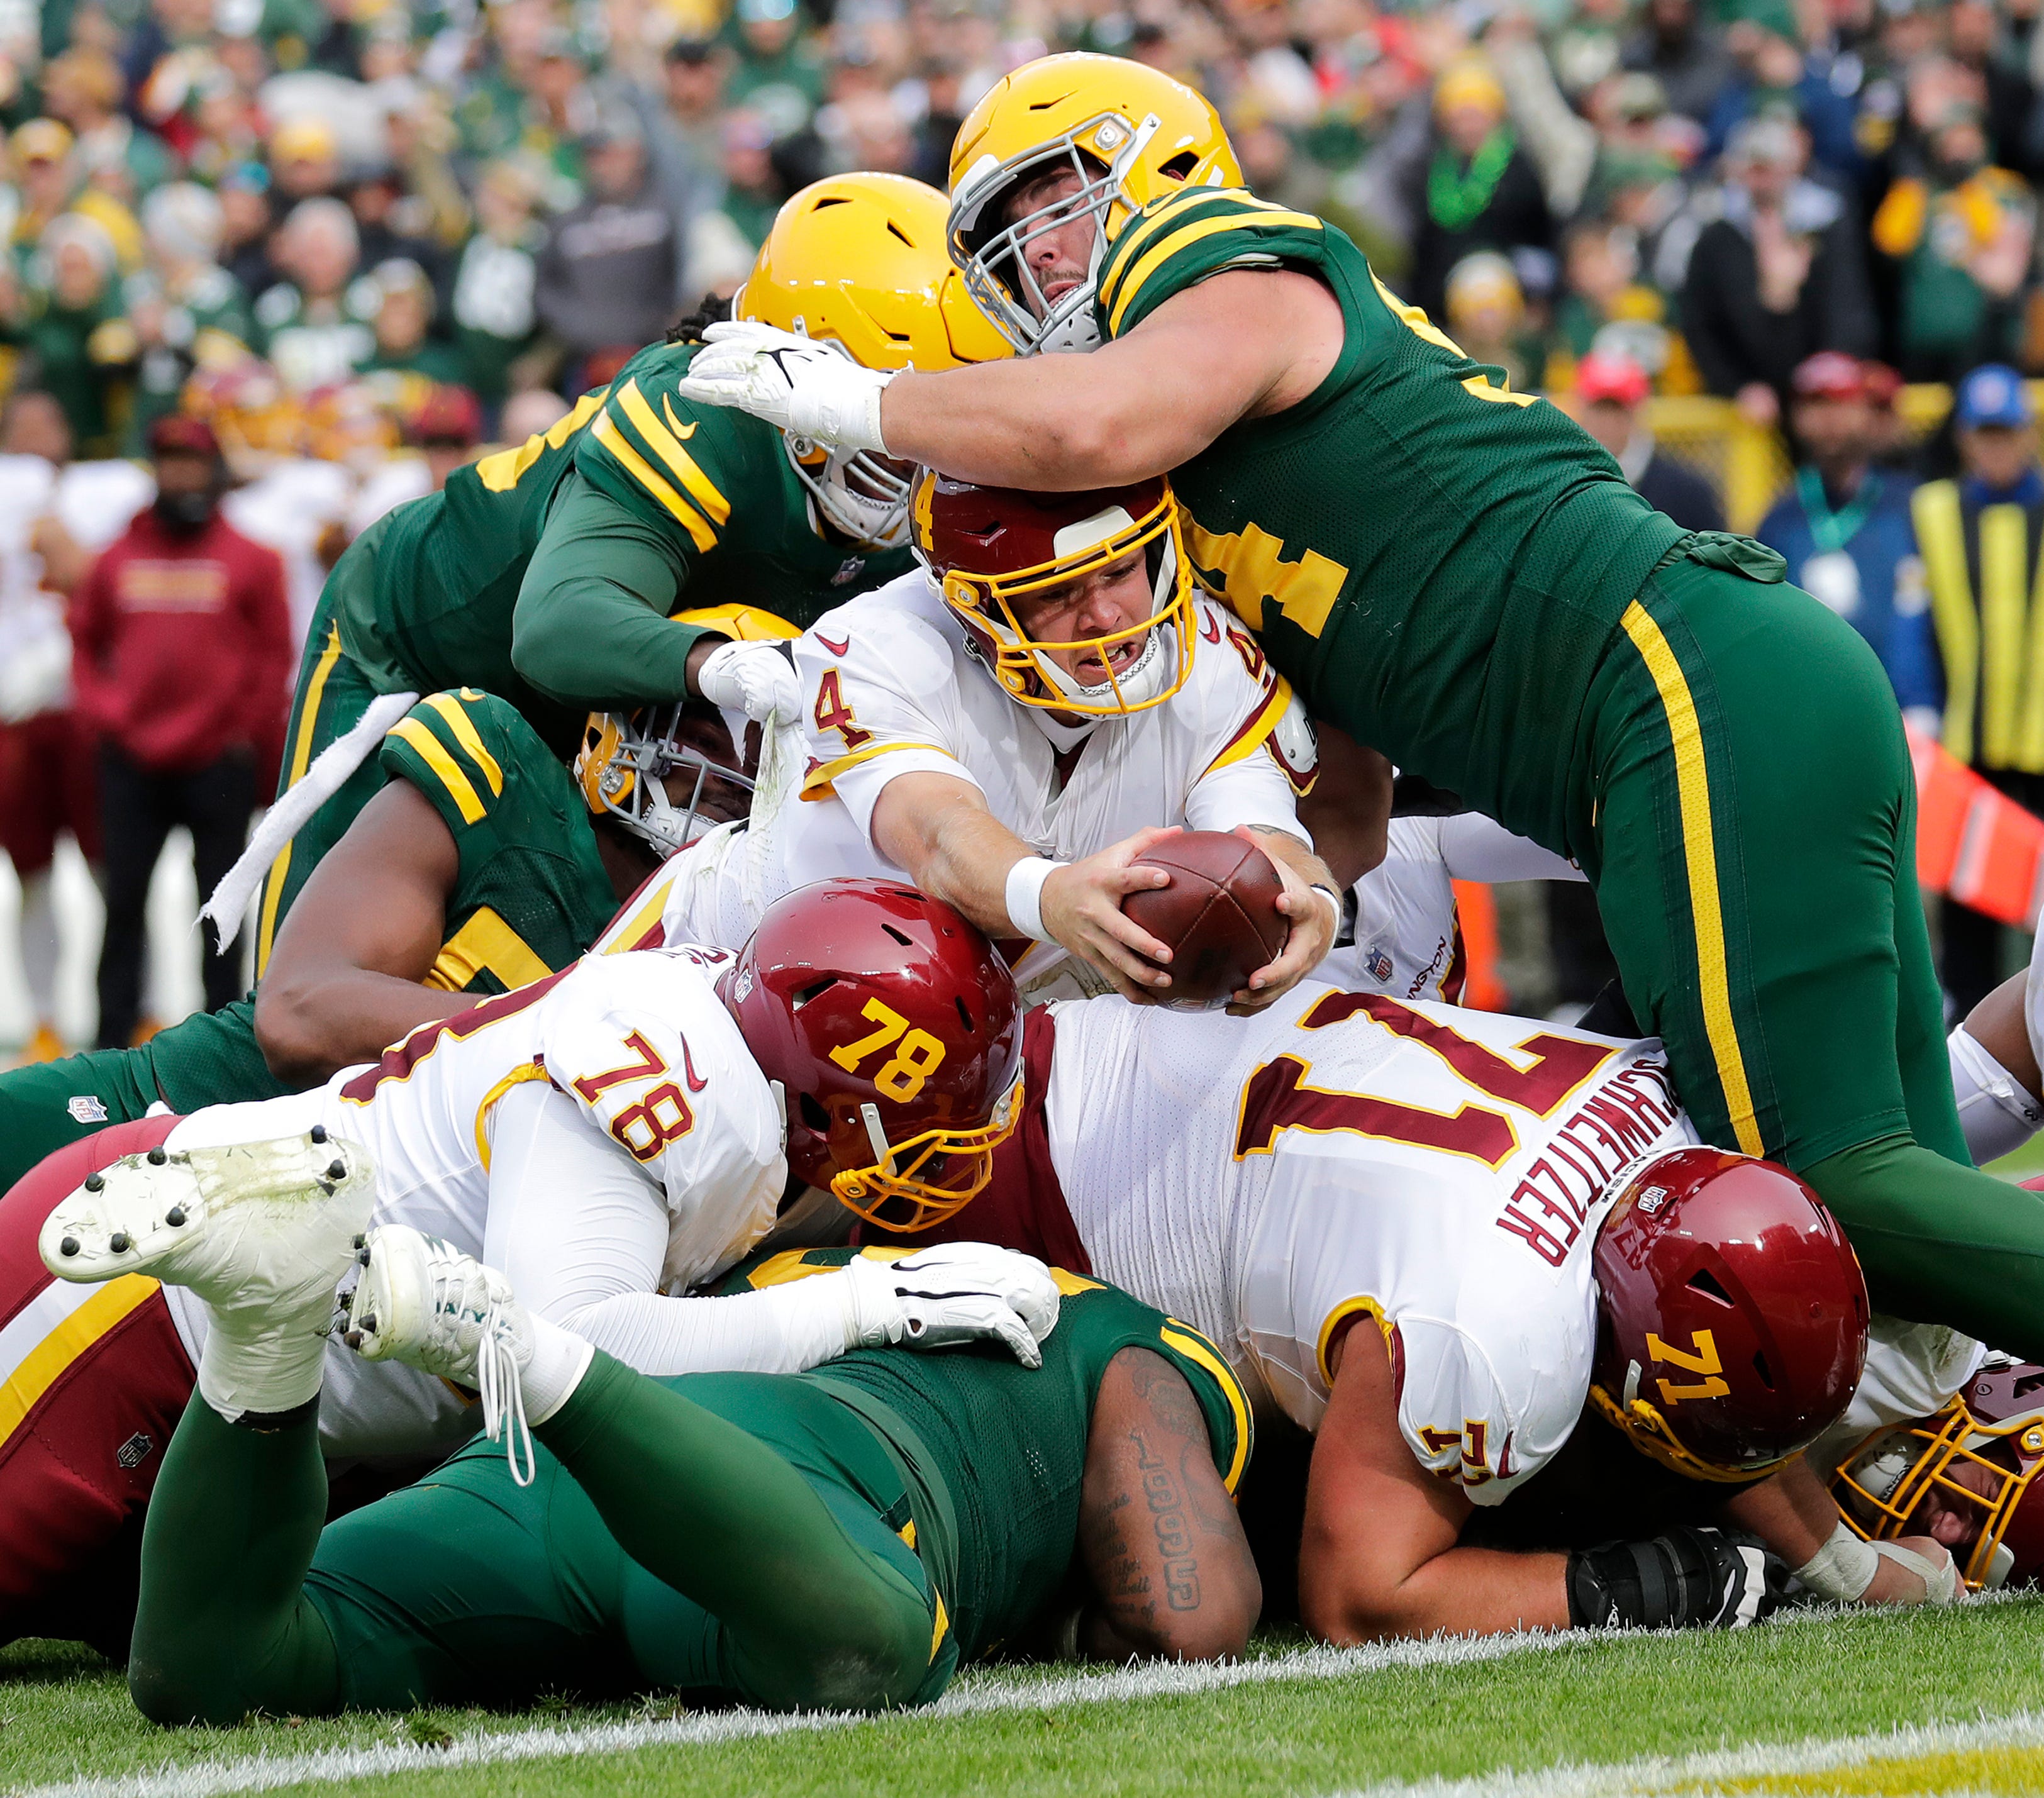 Washington Football Team quarterback Taylor Heinicke (4) comes up short trying to score a touchdown at the goal line in the third quarter against the Green Bay Packers during their football game Sunday, Oct. 24, 2021, at Lambeau Field in Green Bay.